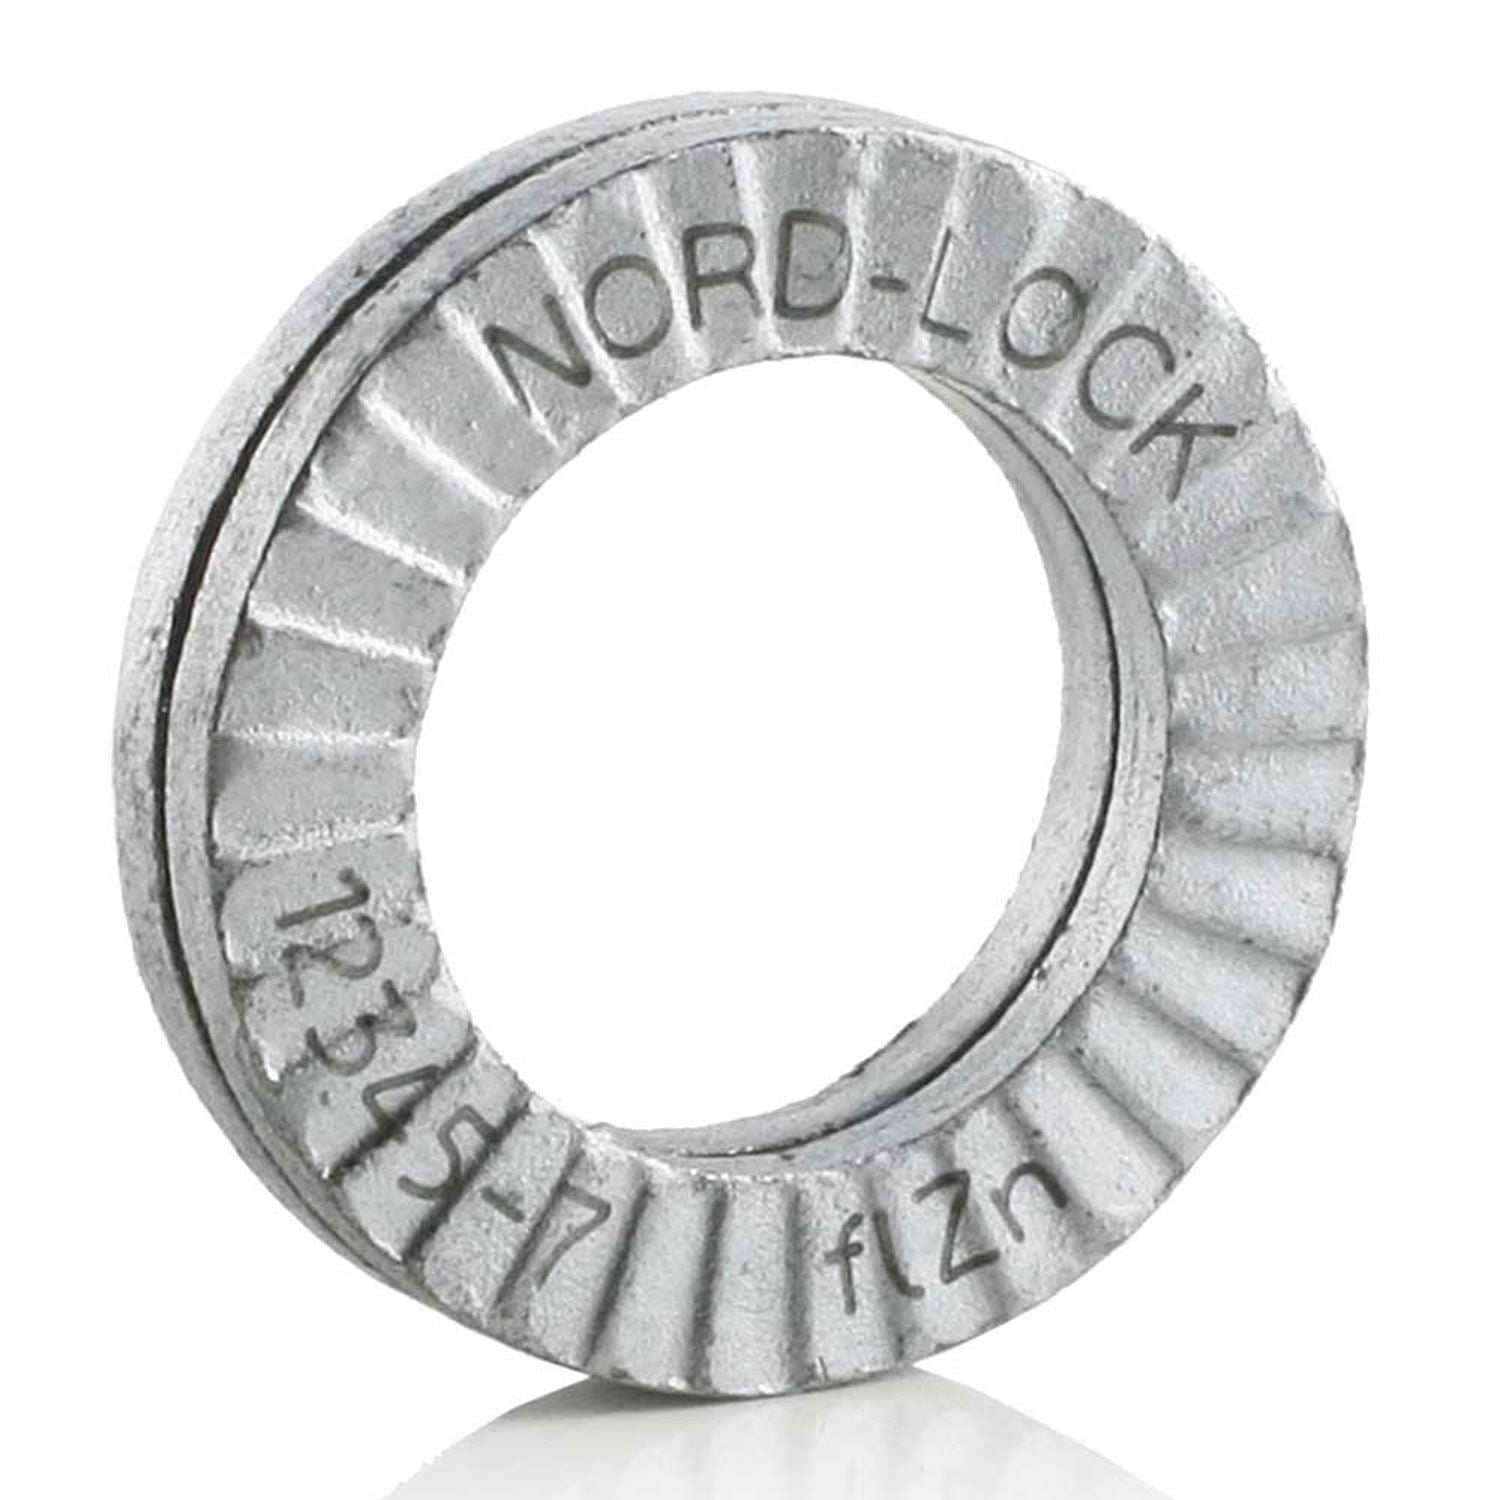 Stainless Steel 316 Lock Washer #10 pack of 50 